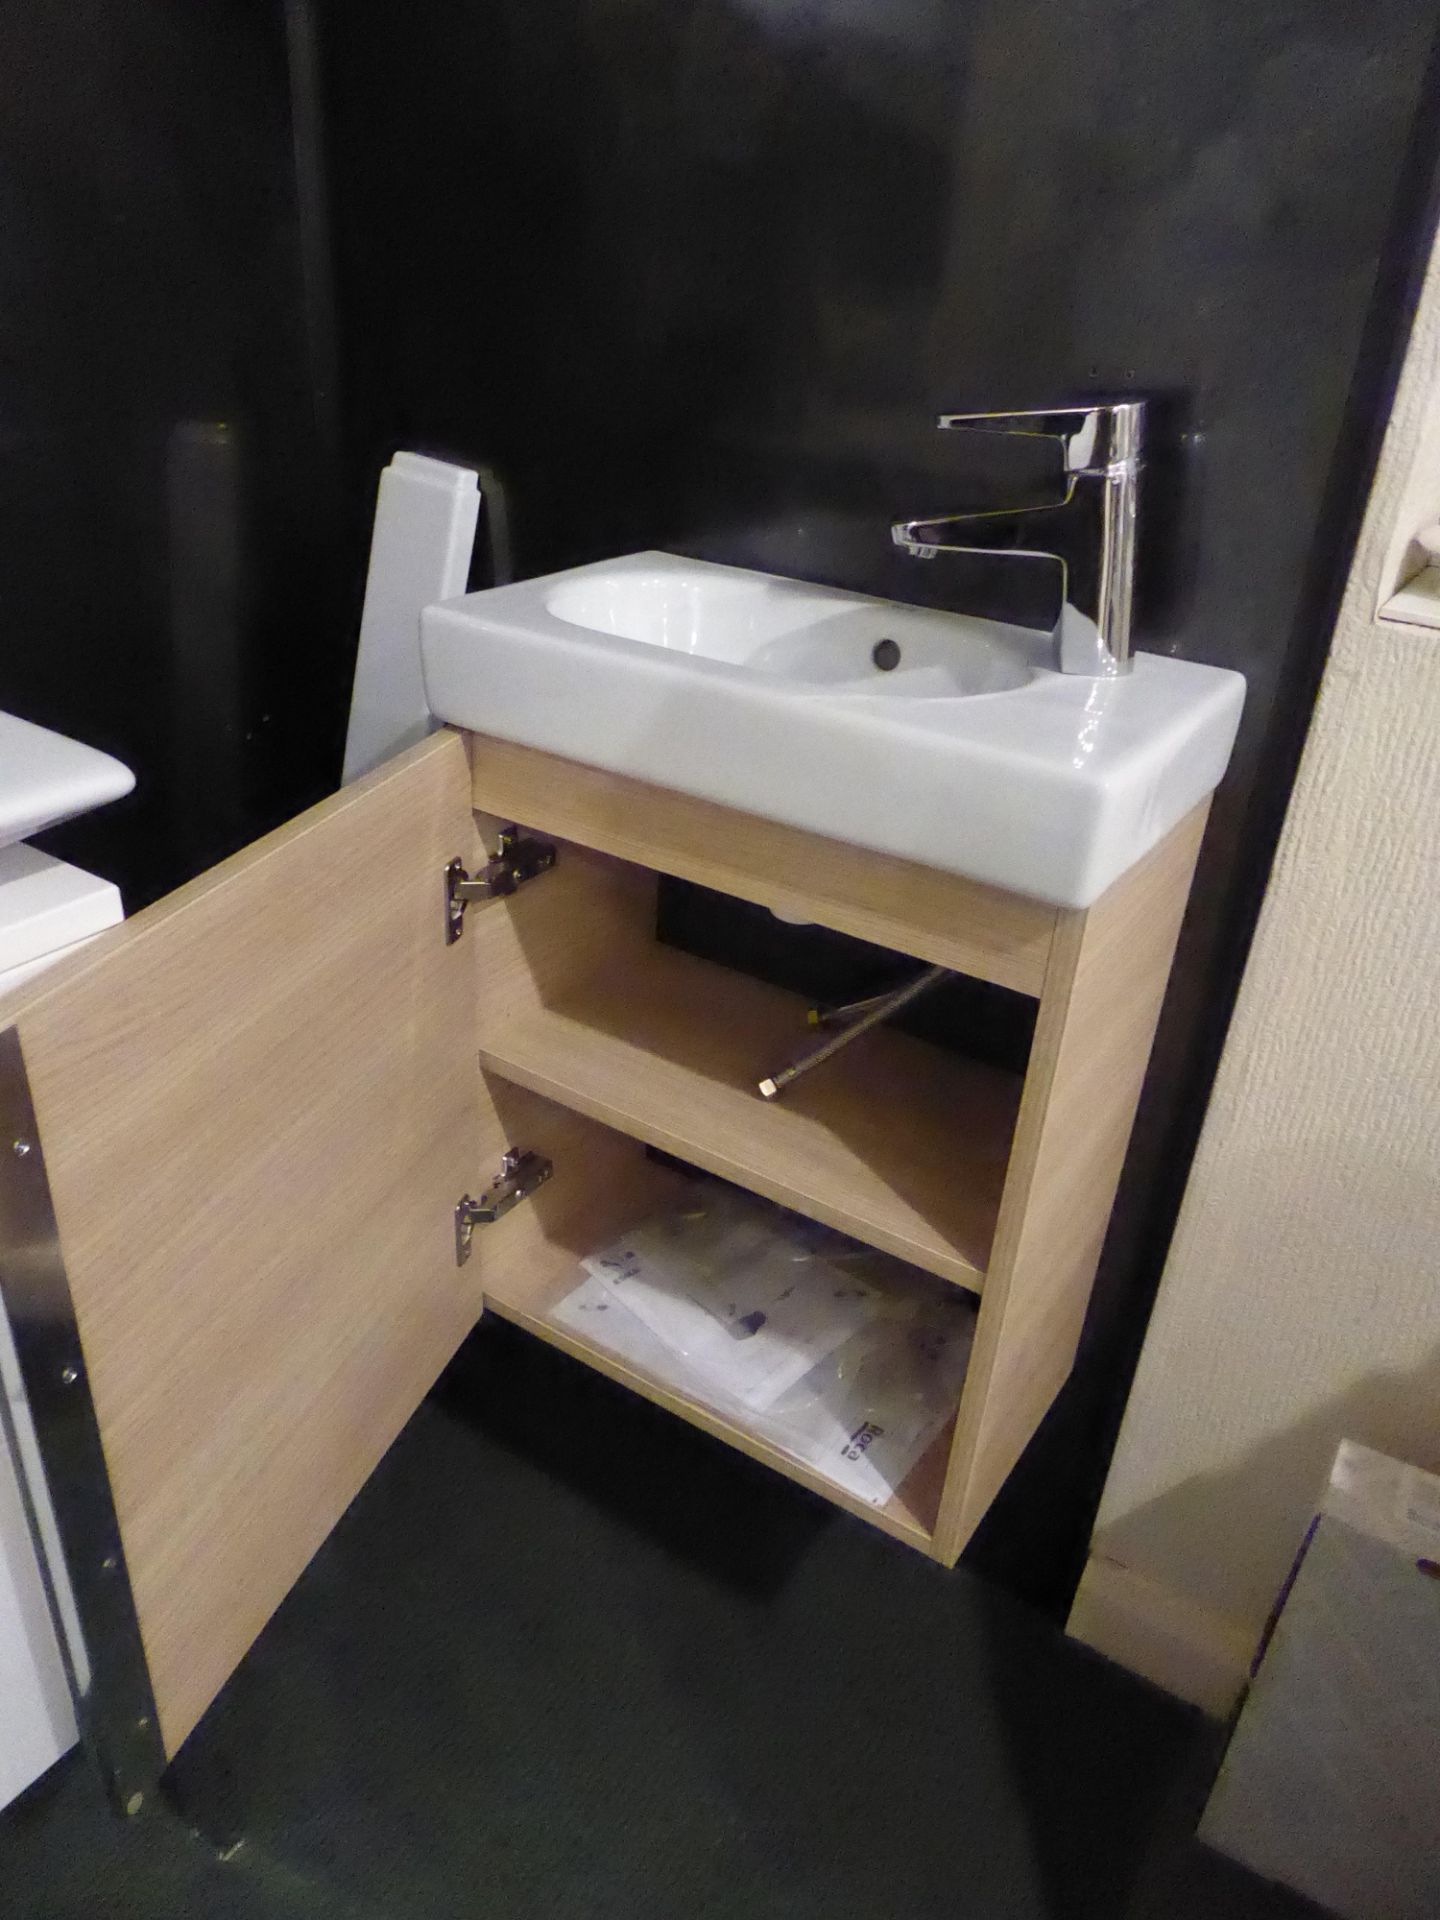 Roca mini cloakroom set in Oak with cupboard basin and mirrored cabinet - Image 2 of 3